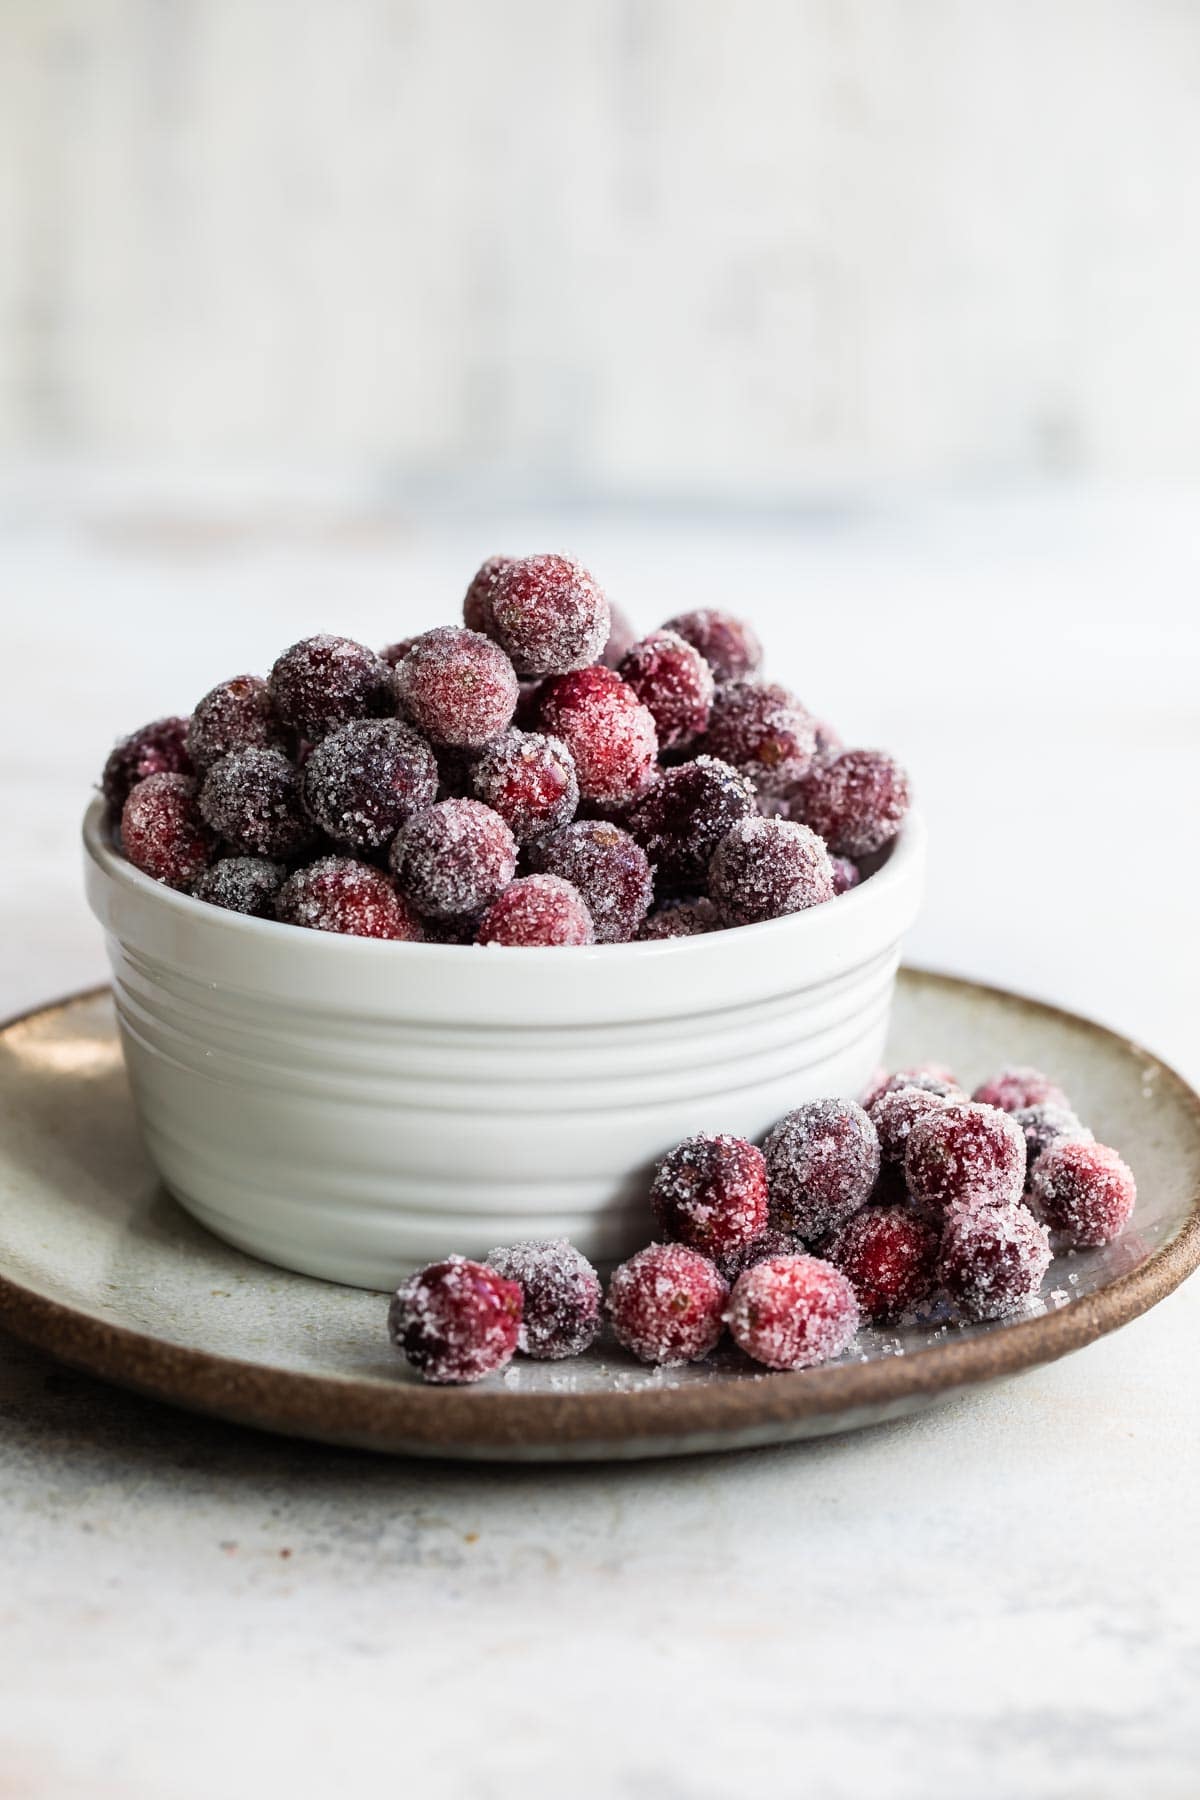 Sugared cranberries in a small white bowl.